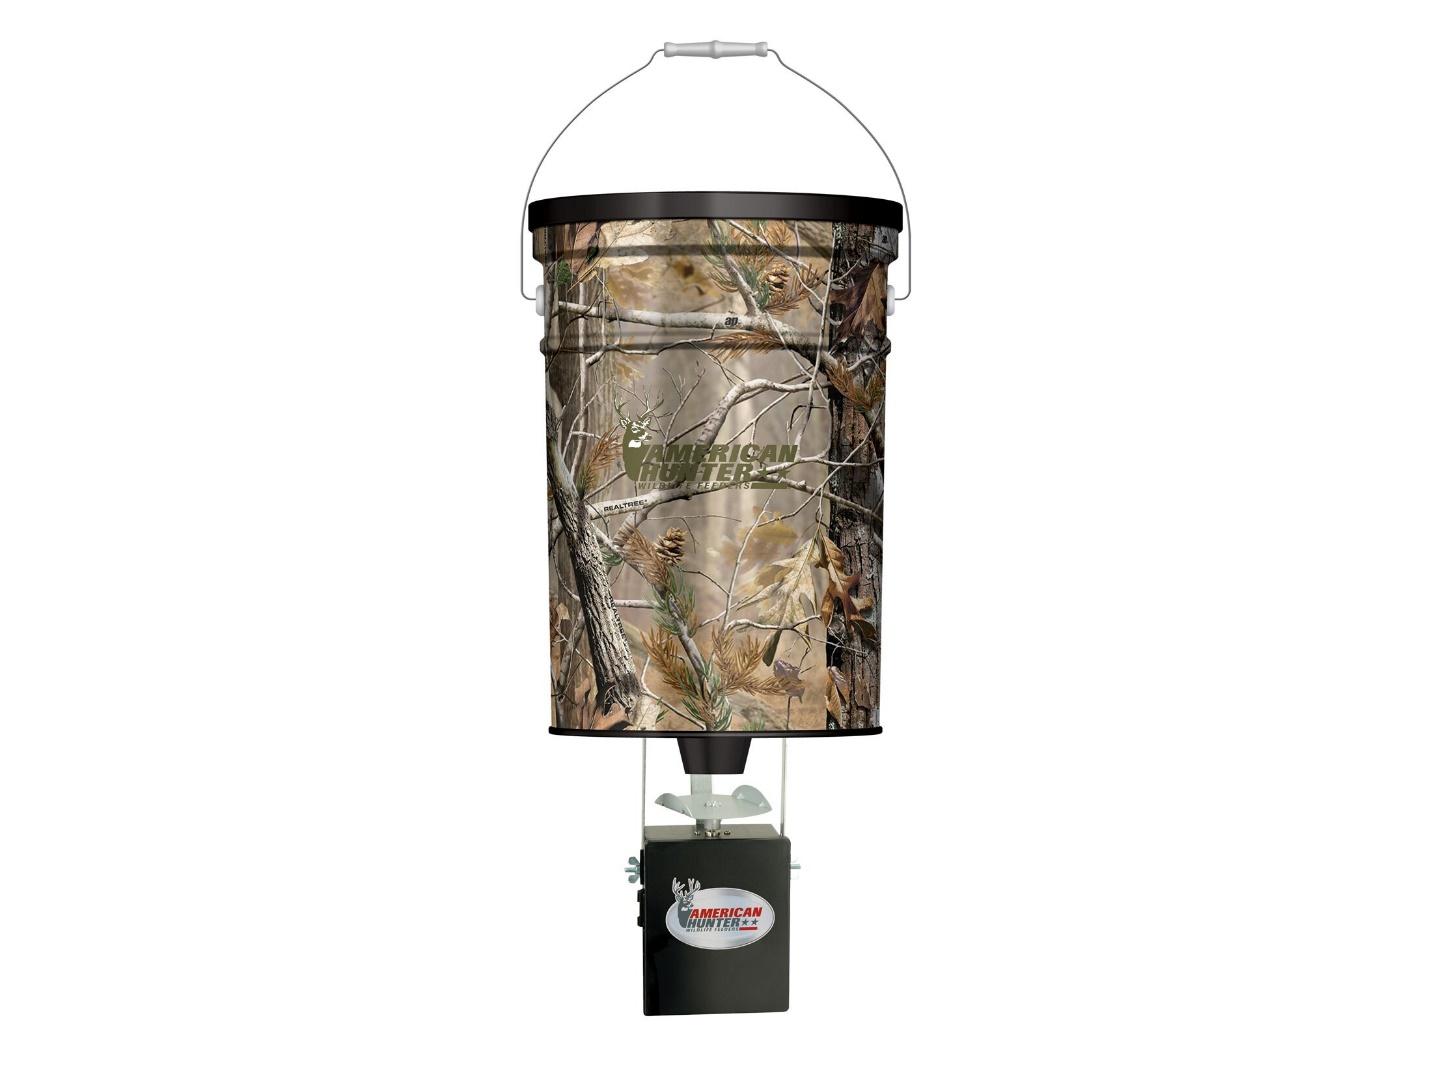 American hunter deer feeders are hunter's favorite due to big capacity and extreme durability. Find top brand deer feeder reviews here.